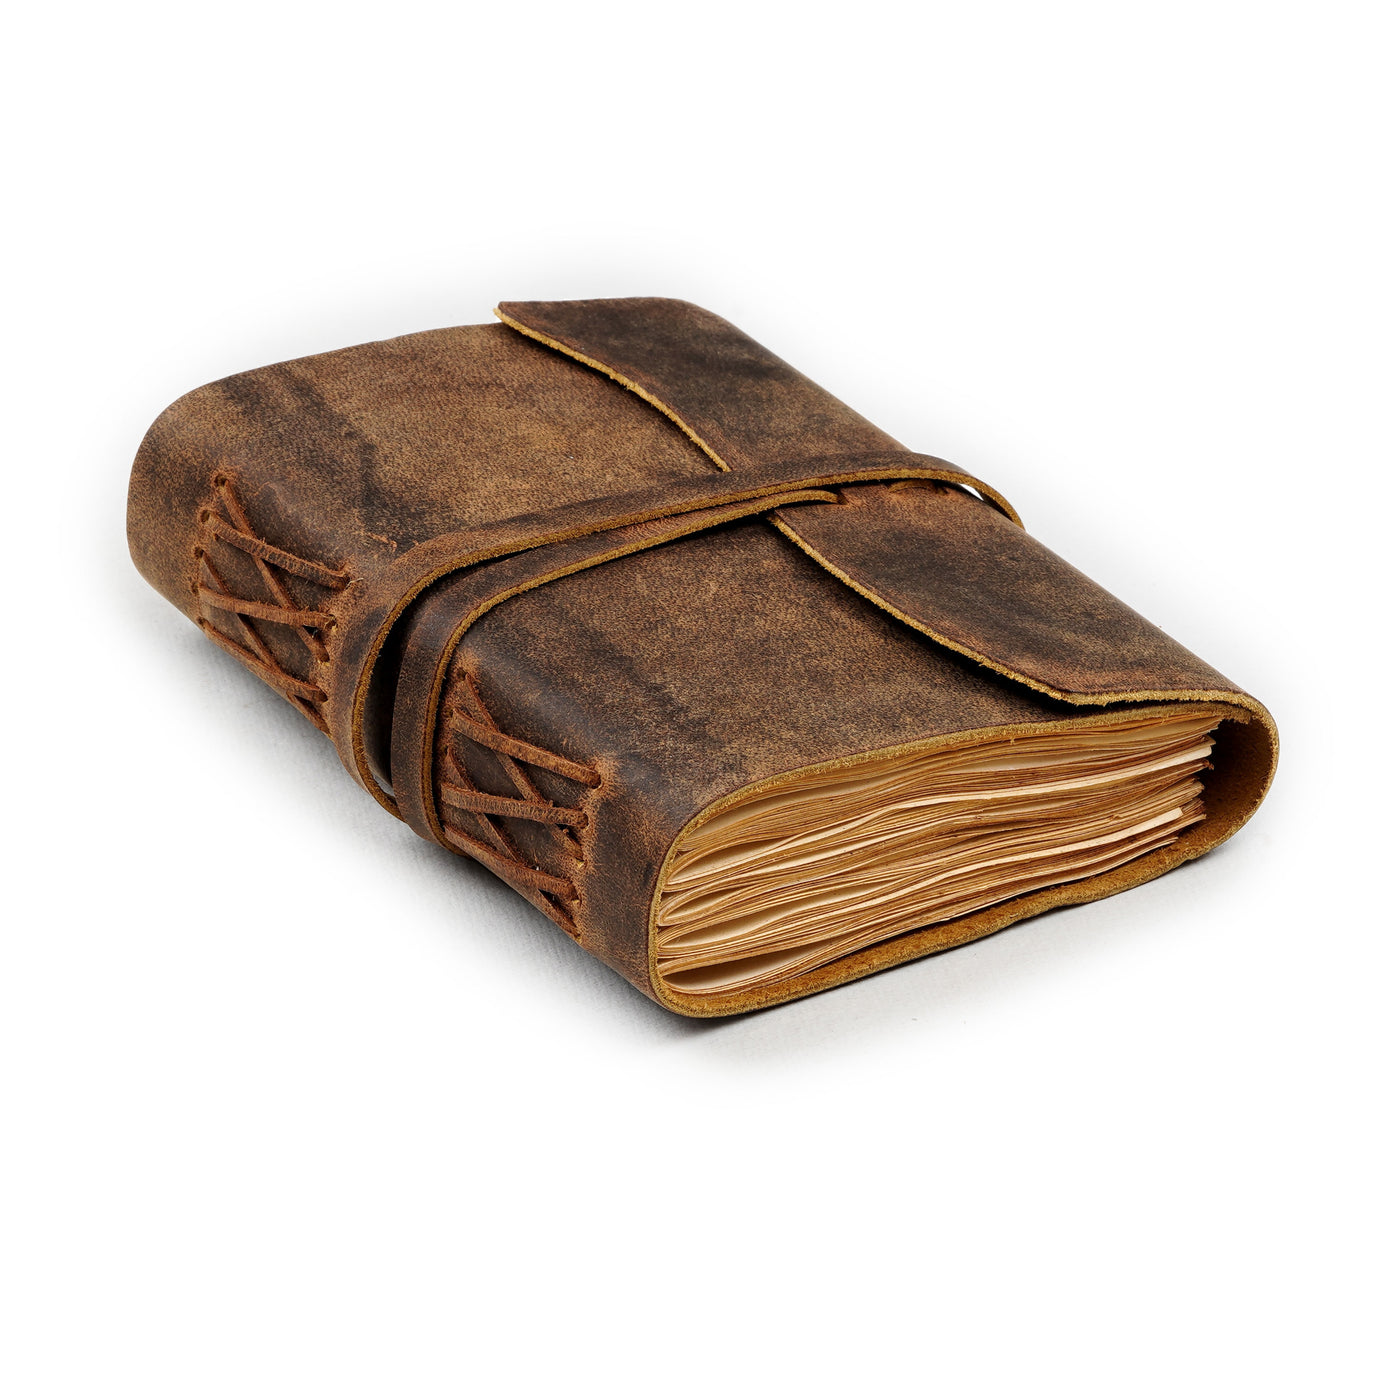 Buy Now Office Journal - Leather Journal - Leather Village